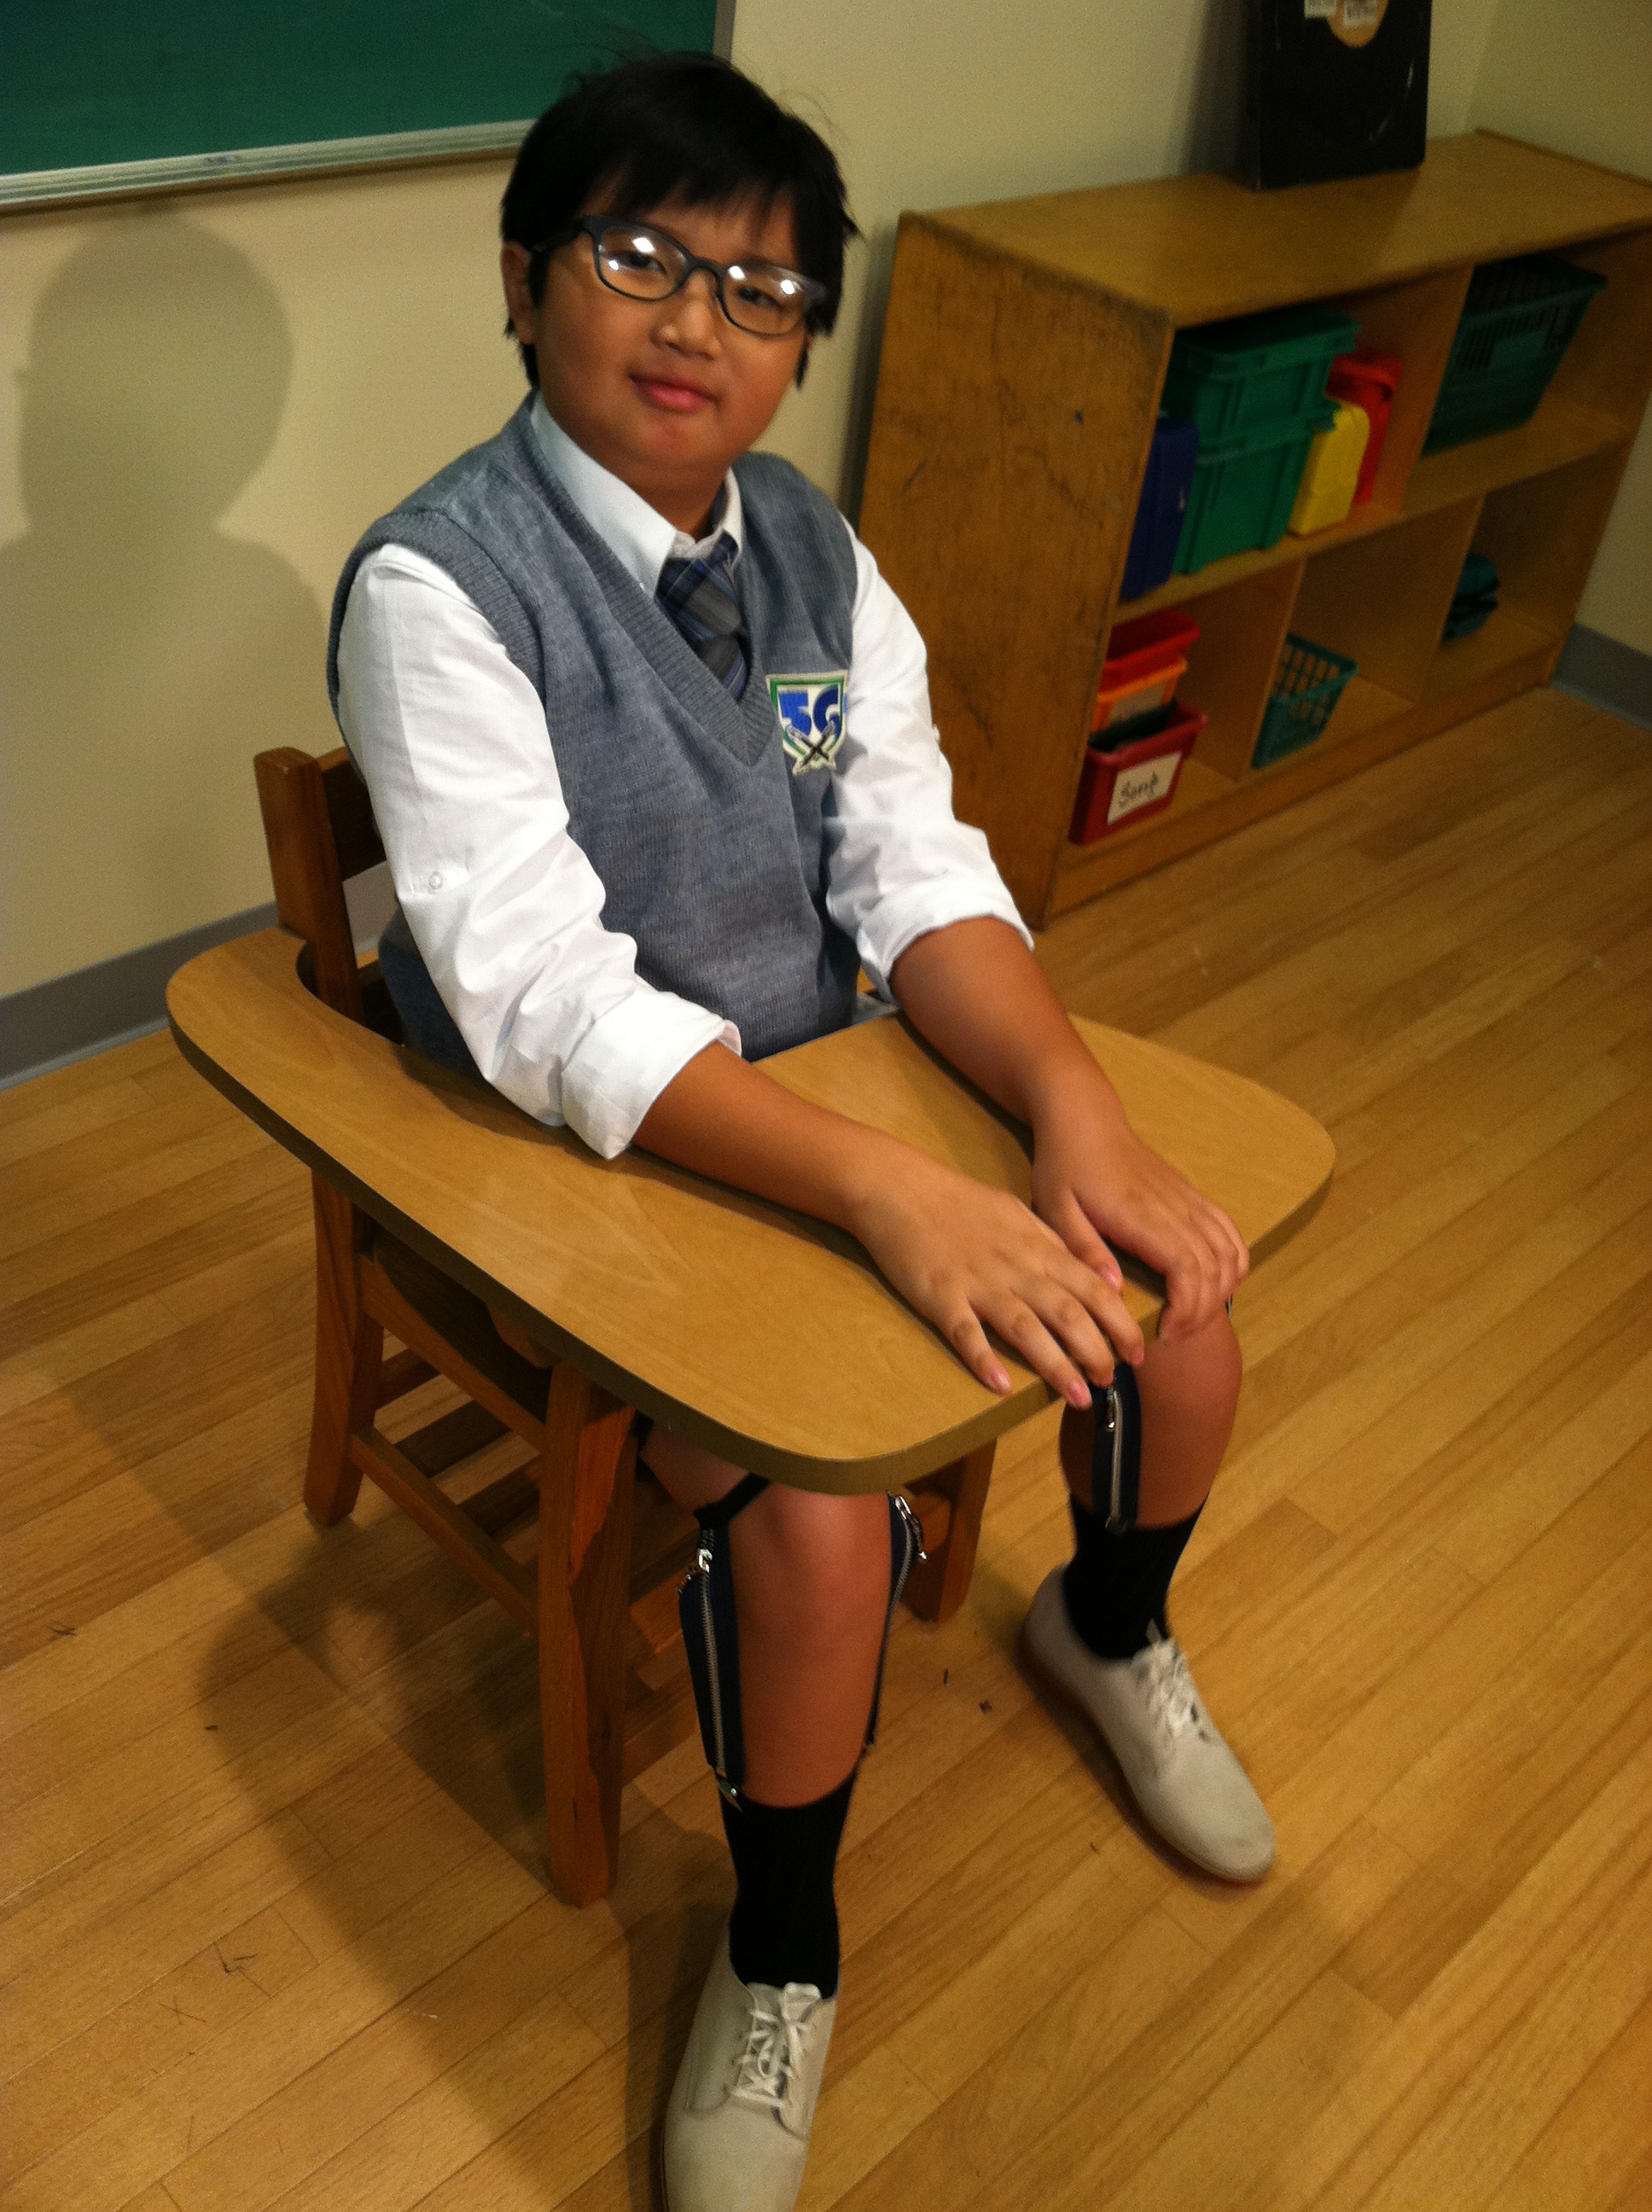 Matthew Zhang, playing a nerdy kid on the set of the Are You Smarter than a Fifth Grader Promo, (2012)